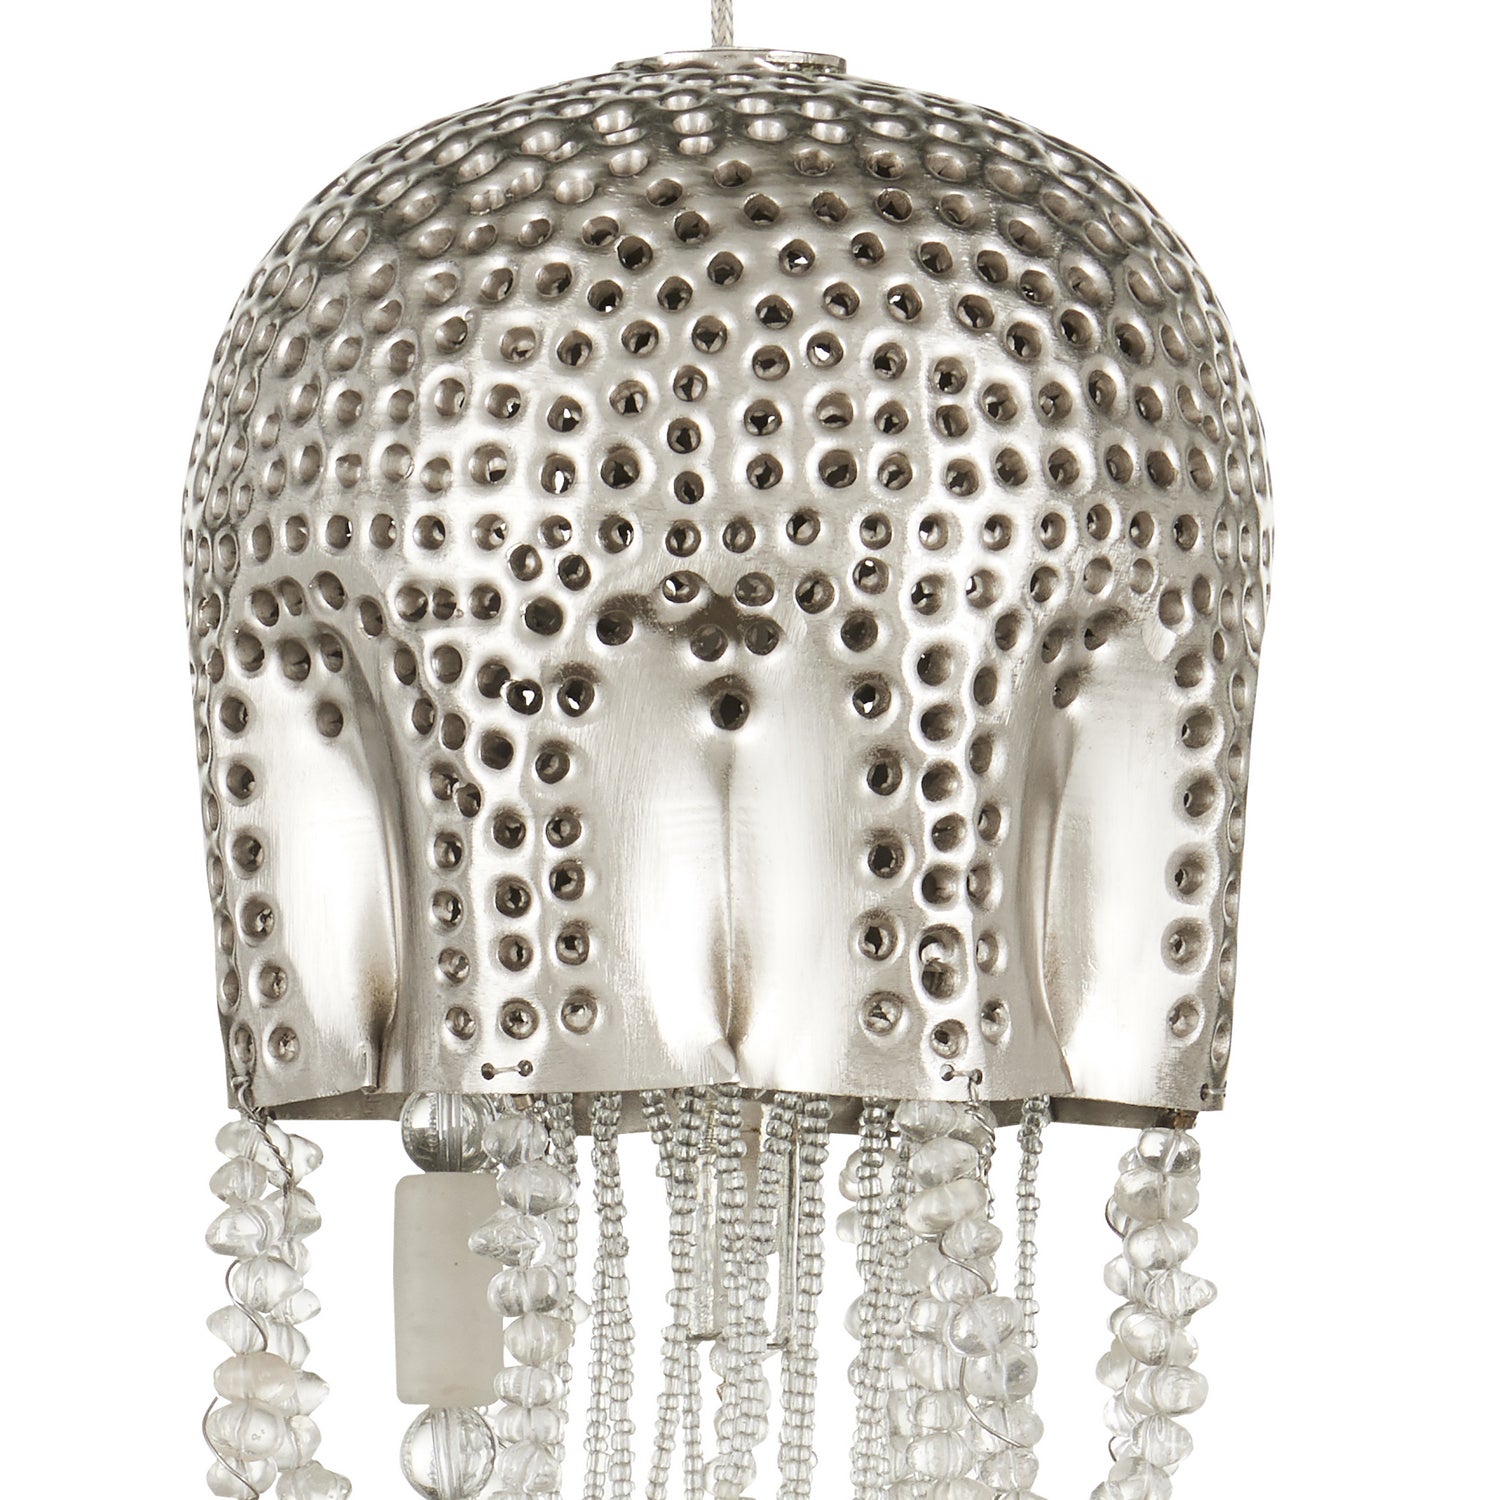 36 Light Pendant from the Medusa collection in Nickel/Silver finish